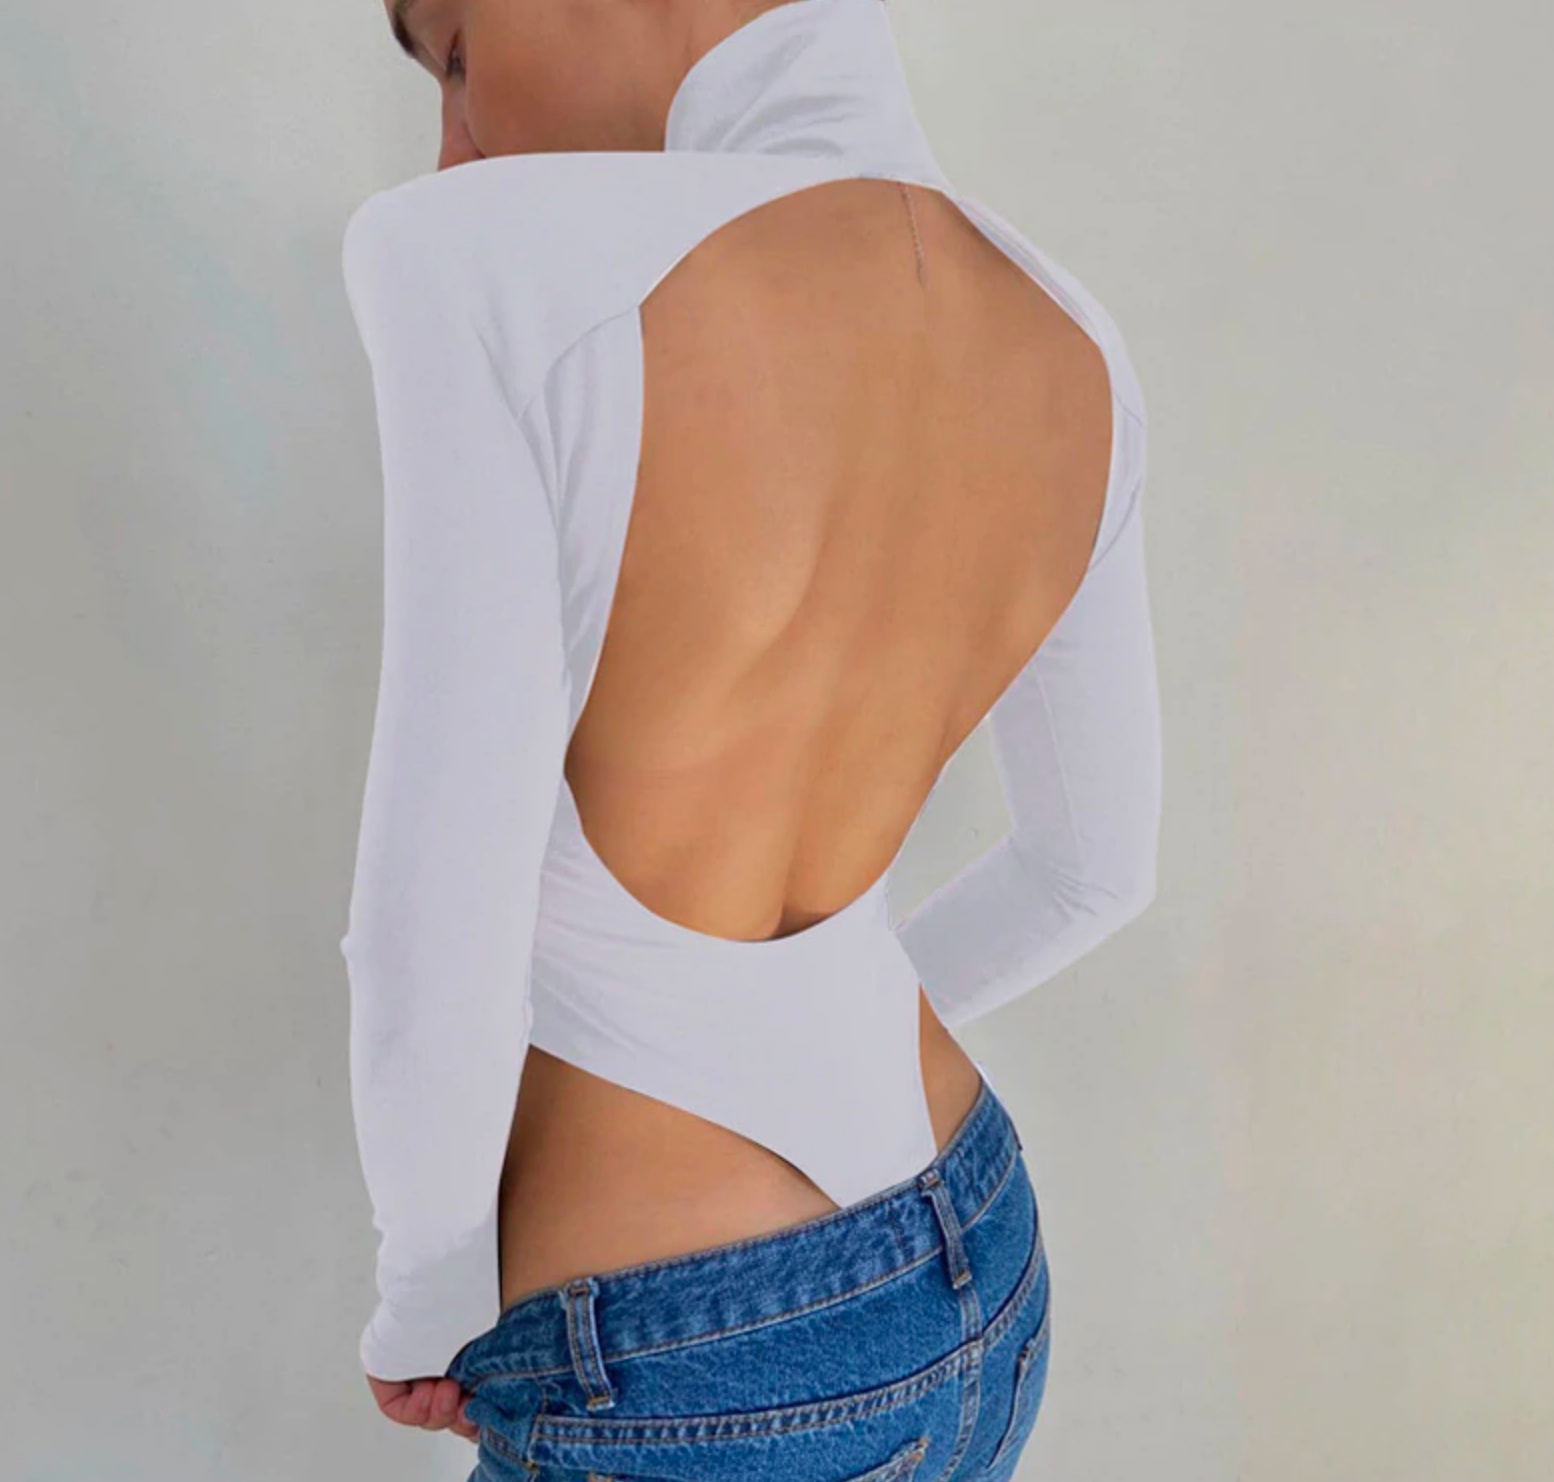 Open back bodysuit with long sleeves